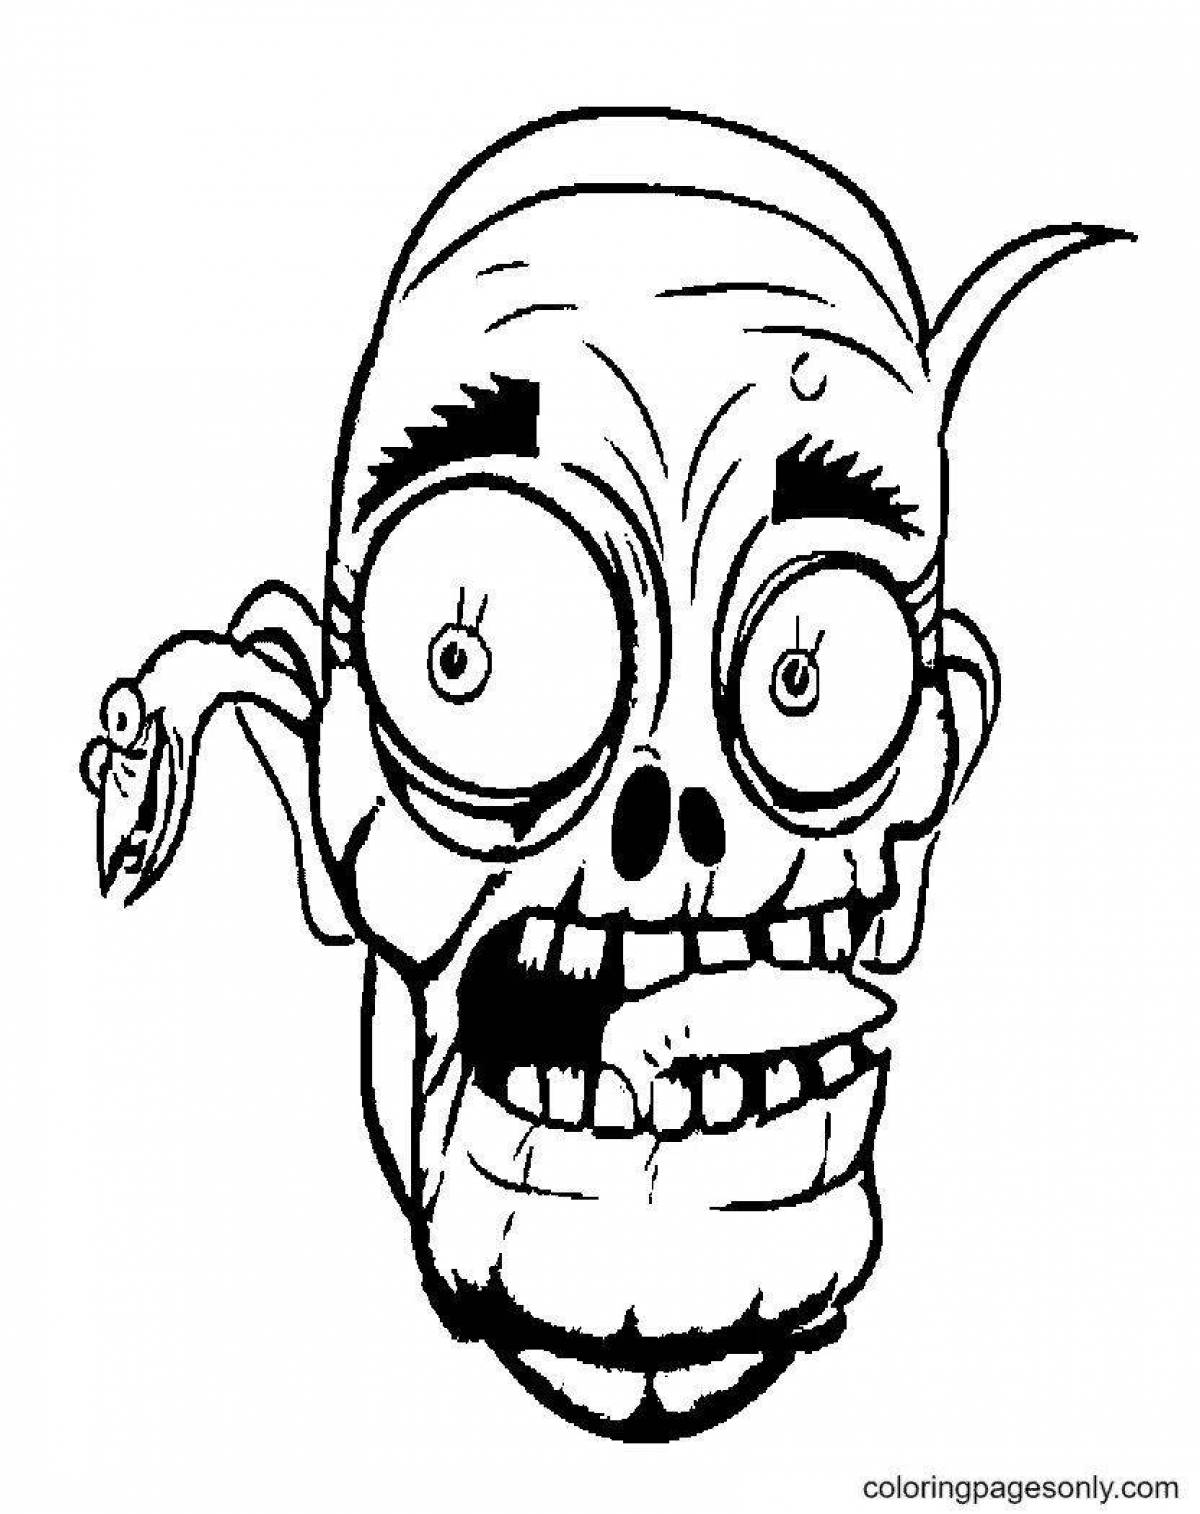 Ugly scary child coloring page